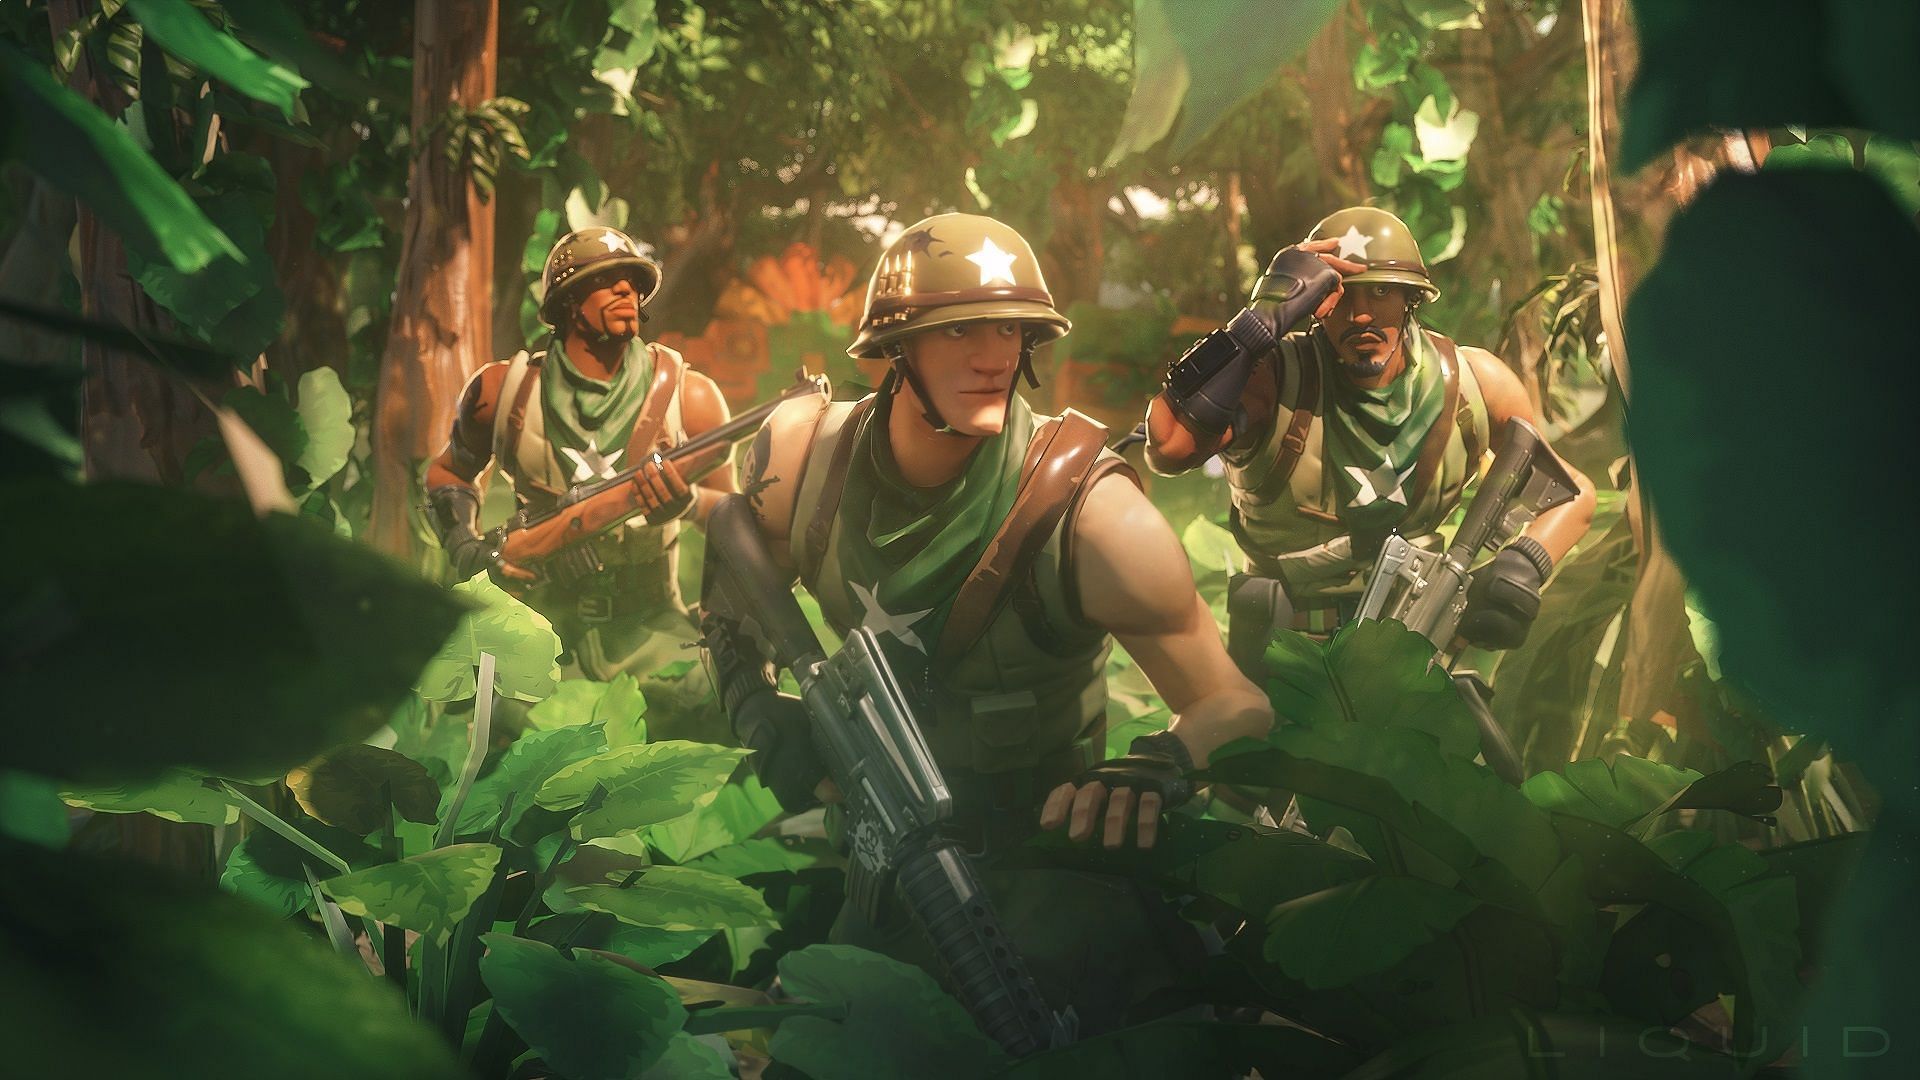 The Jungle biome has been in Fortnite several times (Image via Epic Games)